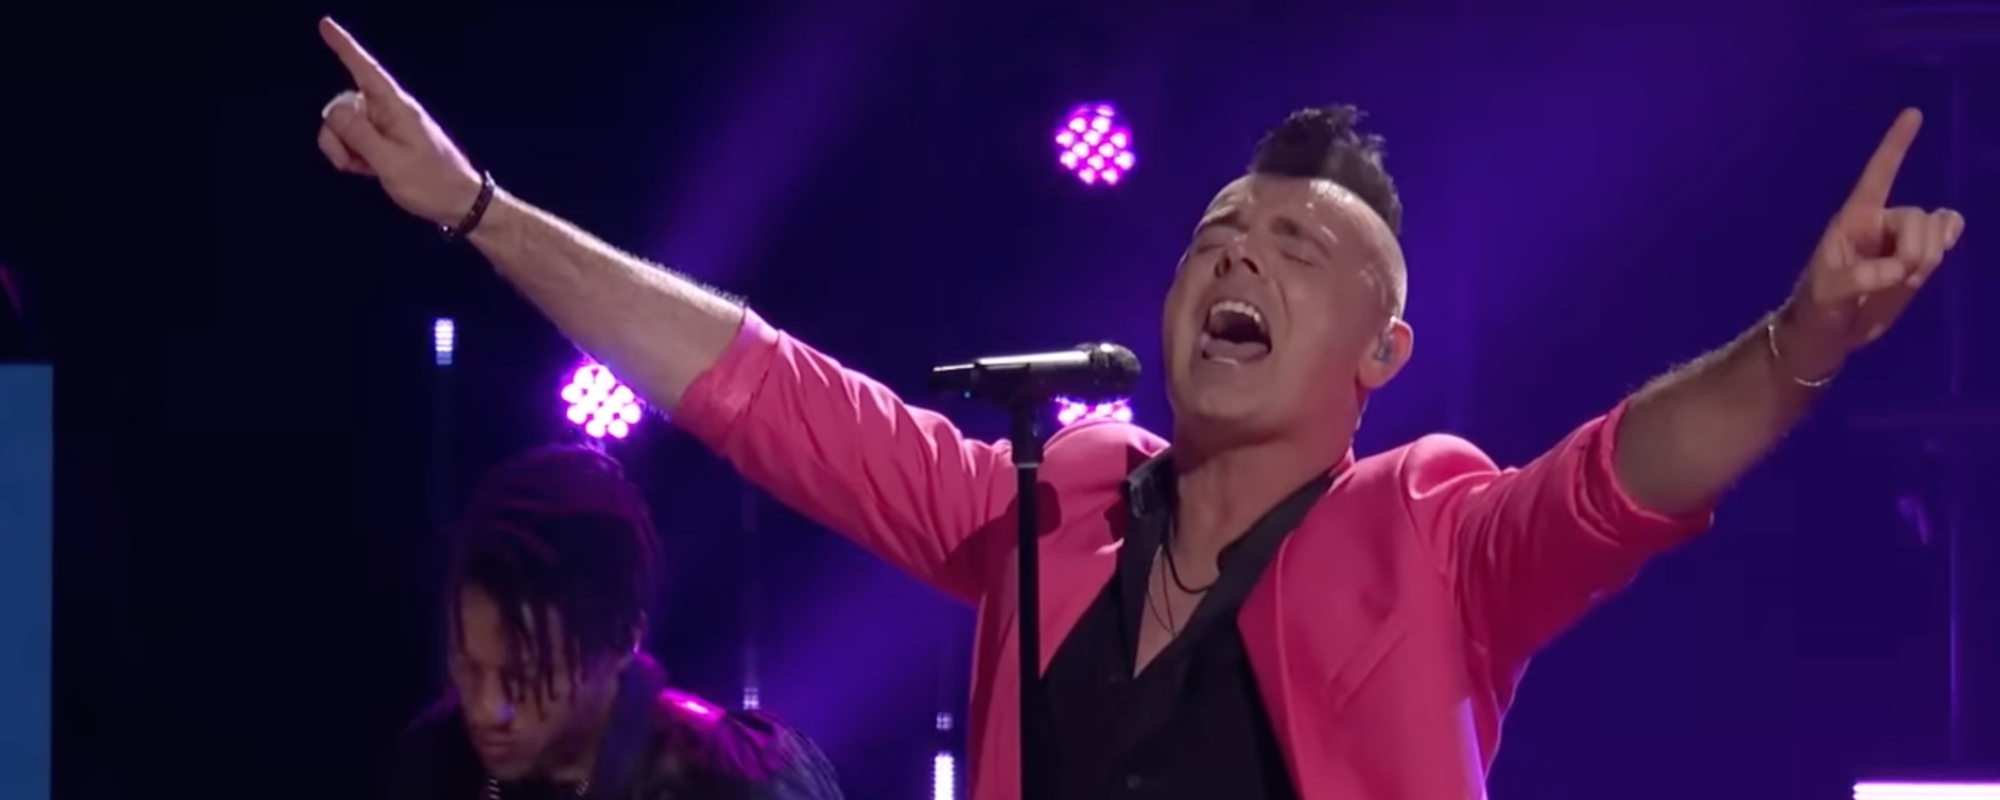 3 Quick Facts About ‘The Voice’ Finalist Bryan Olesen